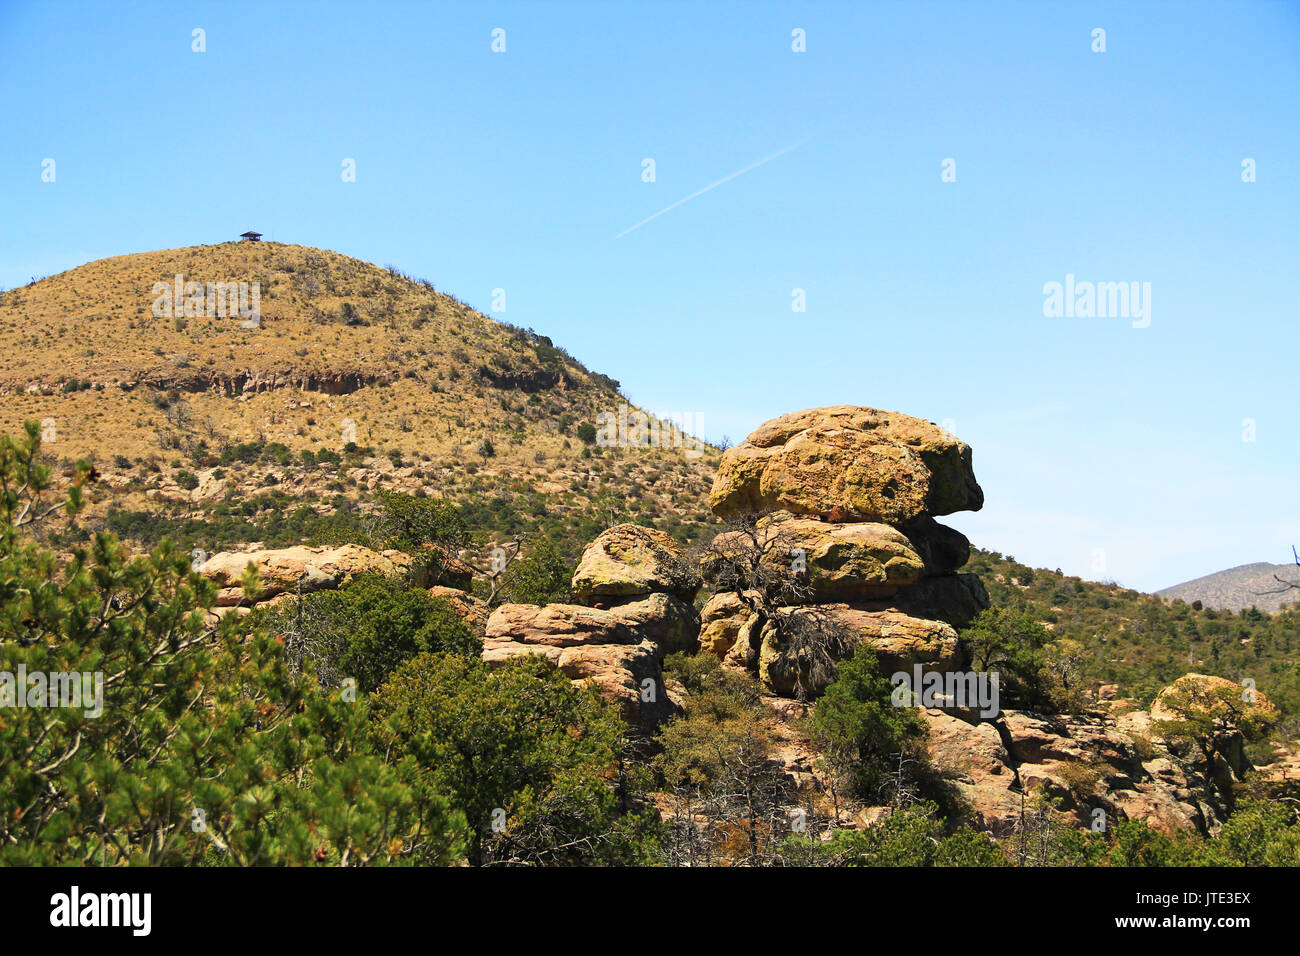 Sugarloaf Mountain in Echo Canyon with rock hoodoos formations in Chiricahua National Monument near Wilcox, in southern Arizona, USA. Stock Photo